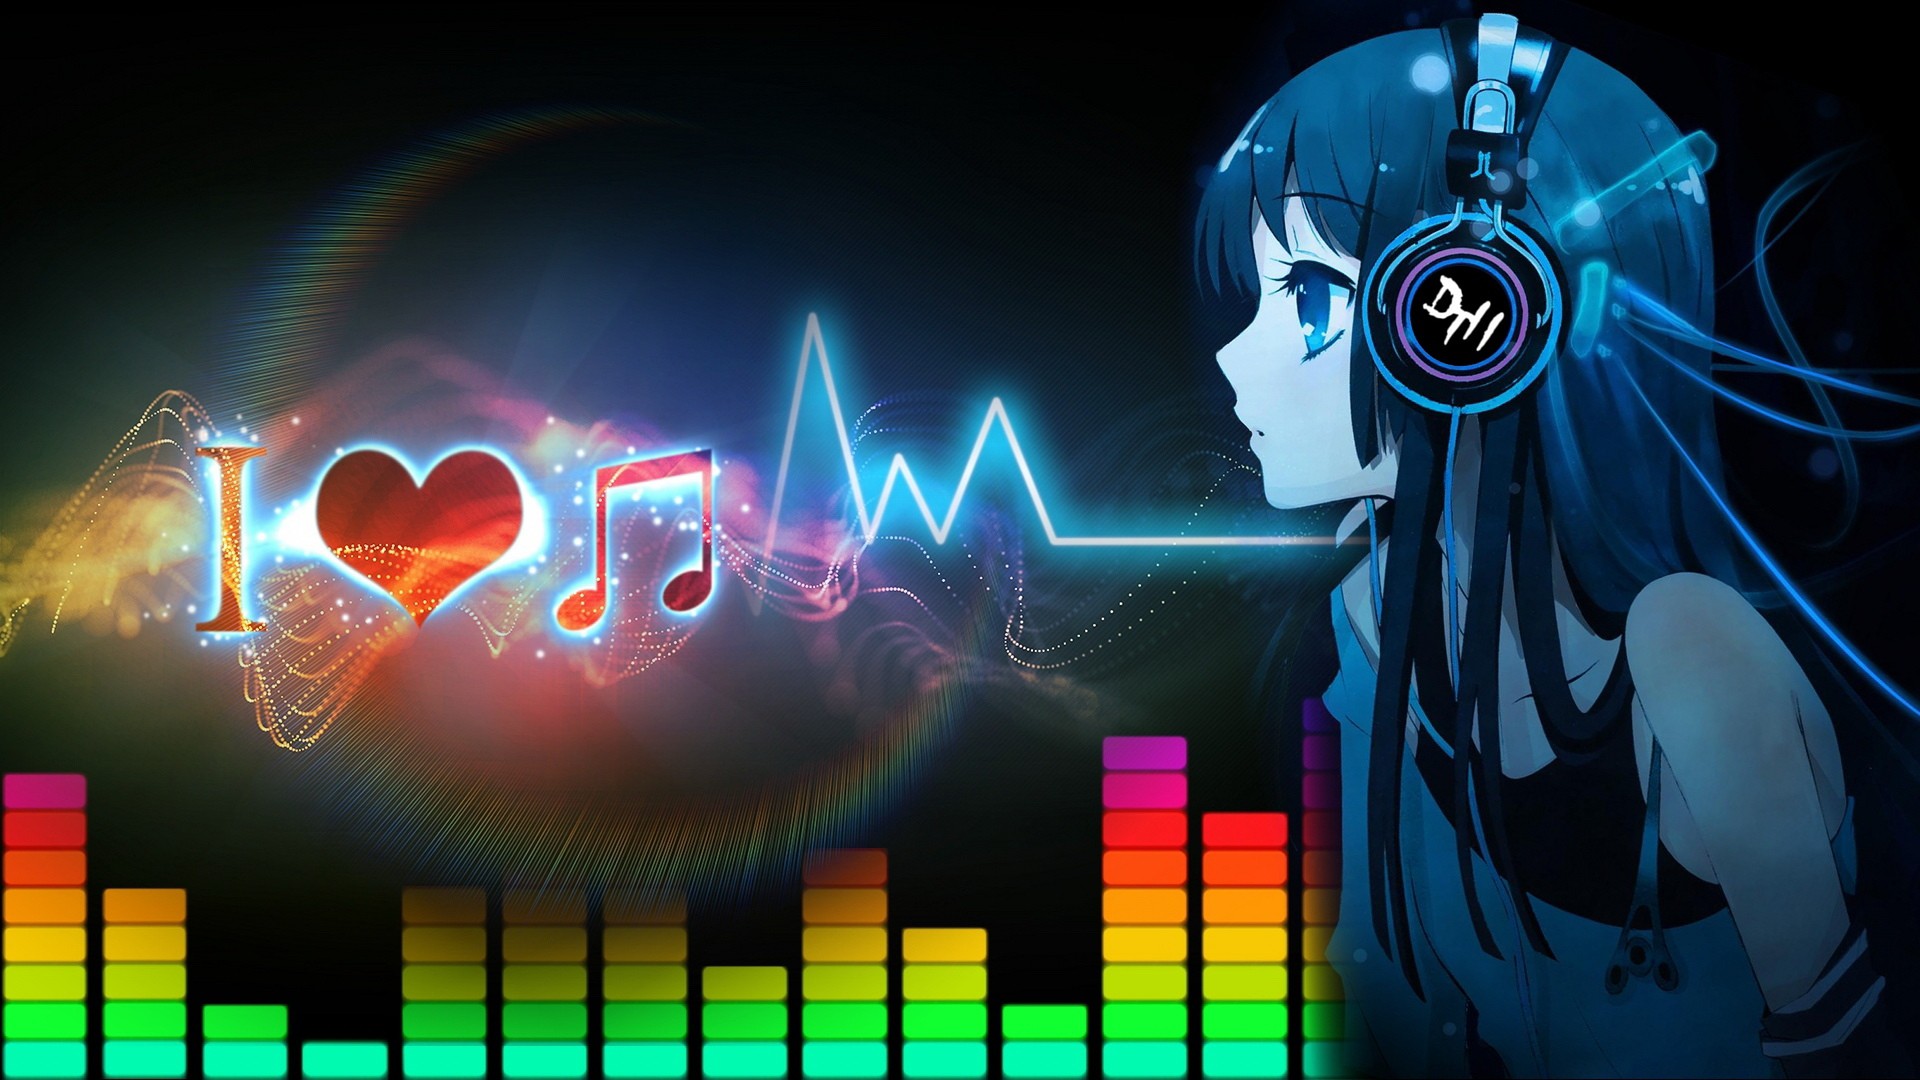 Free Download Anime Music Wallpaper Hd 1920x1080 For Your